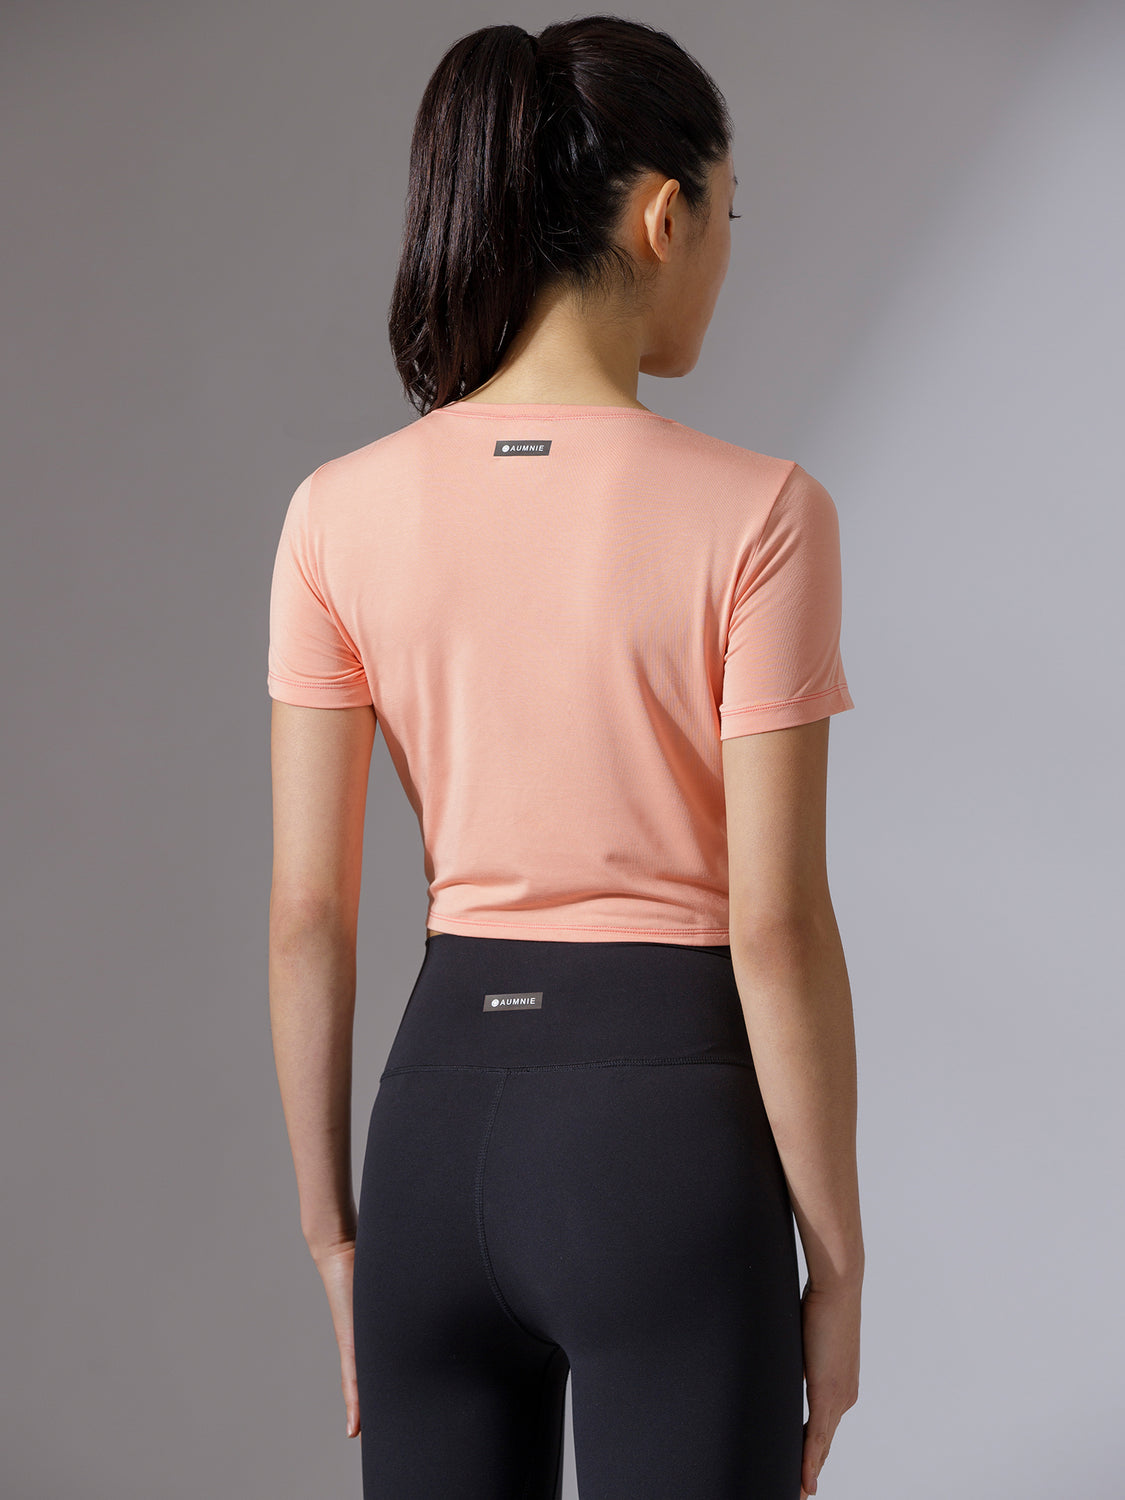 OFF TO THE SIDE SHORT SLEEVE TEE, PEACH